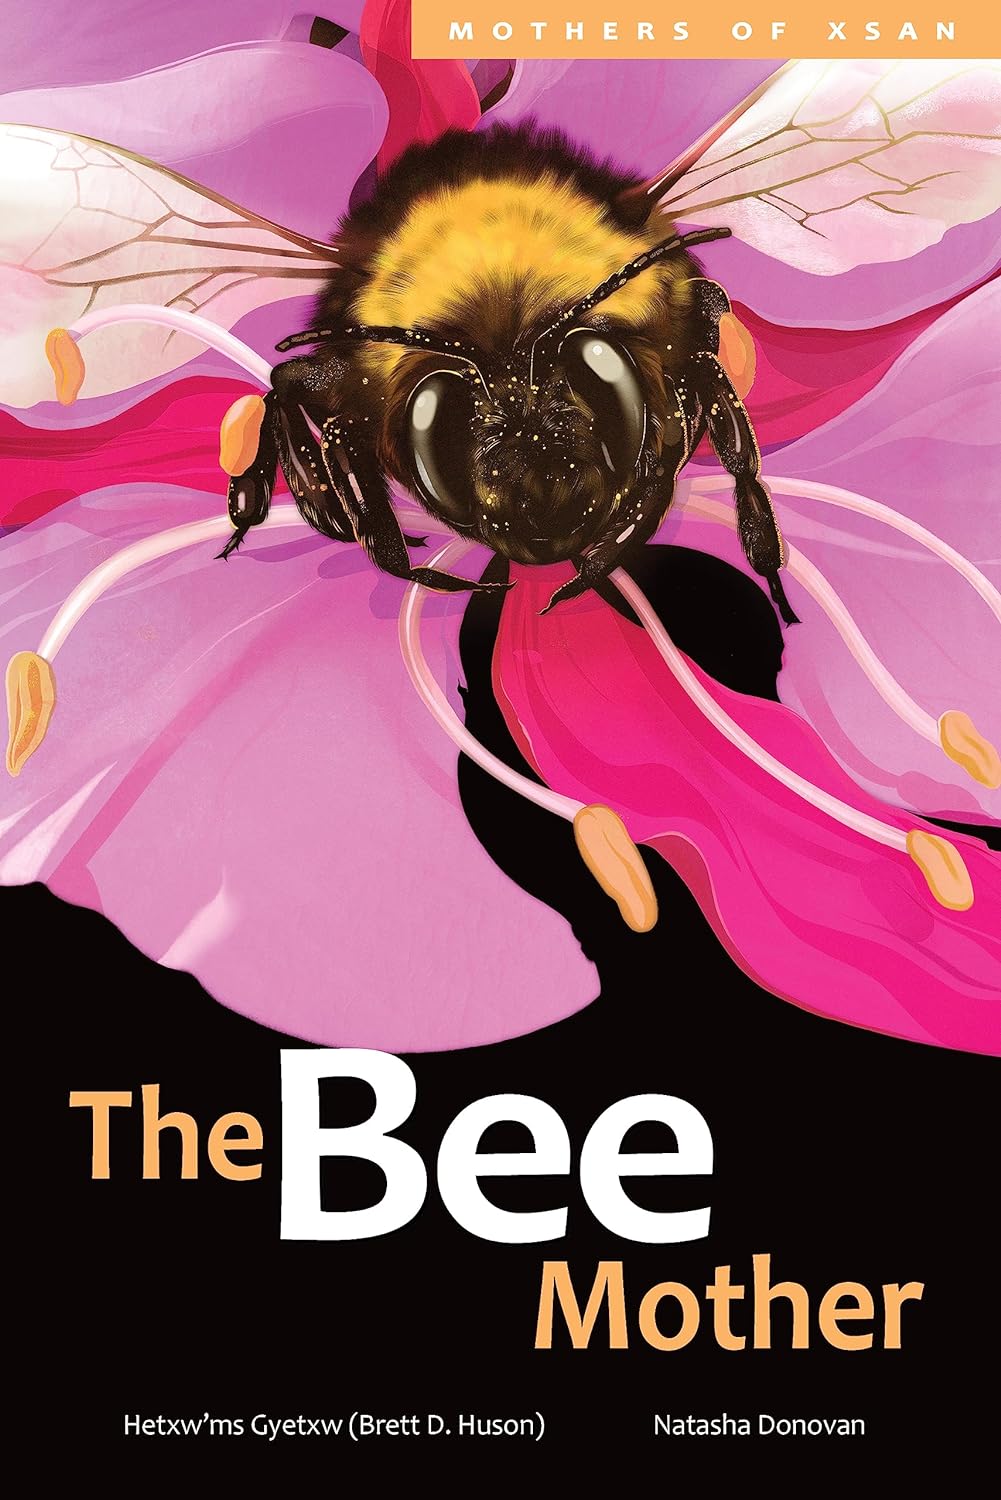 Mothers of Xsan #7: The Bee Mother by Brett D. Hudson